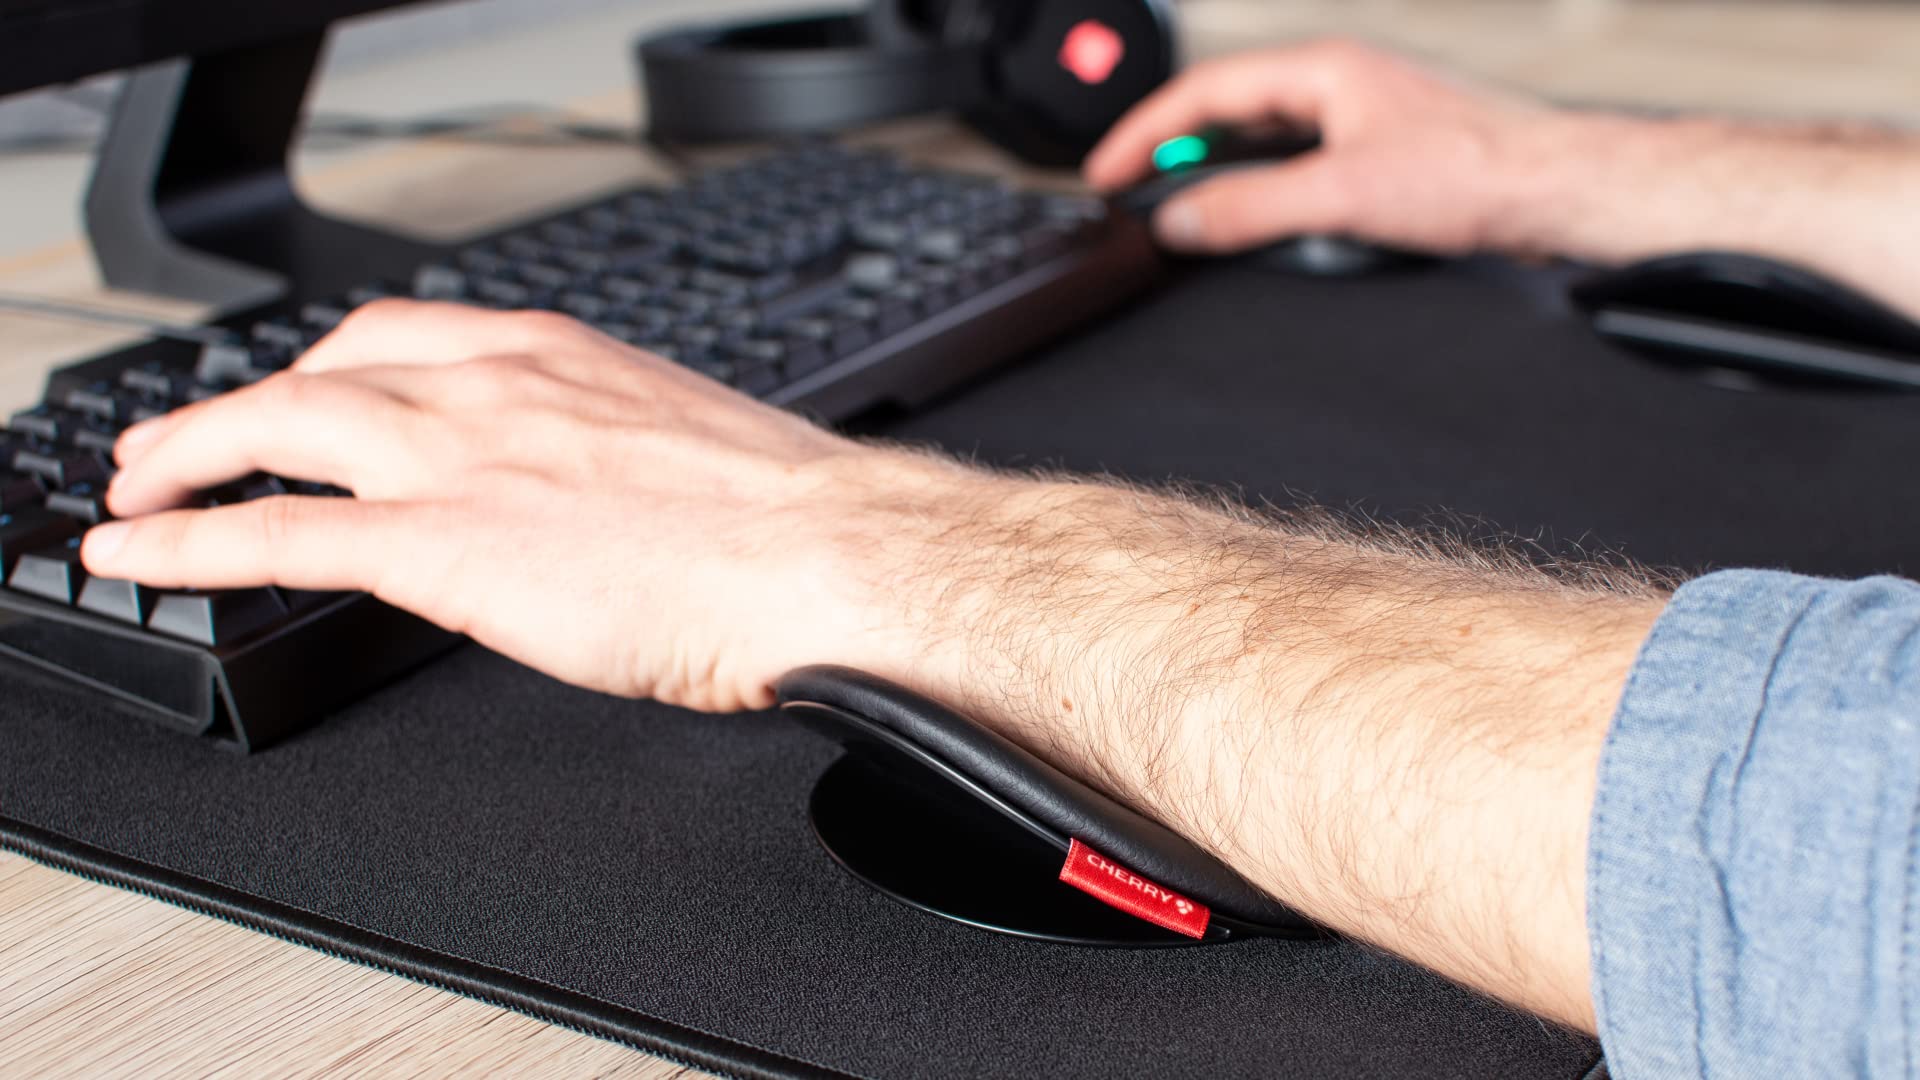 CHERRY SLIDEPAD Ergo Sliding armrest to Improve ergonomics at The Workplace. Full Freedom of Movement with a Comfortable Posture at The Same time